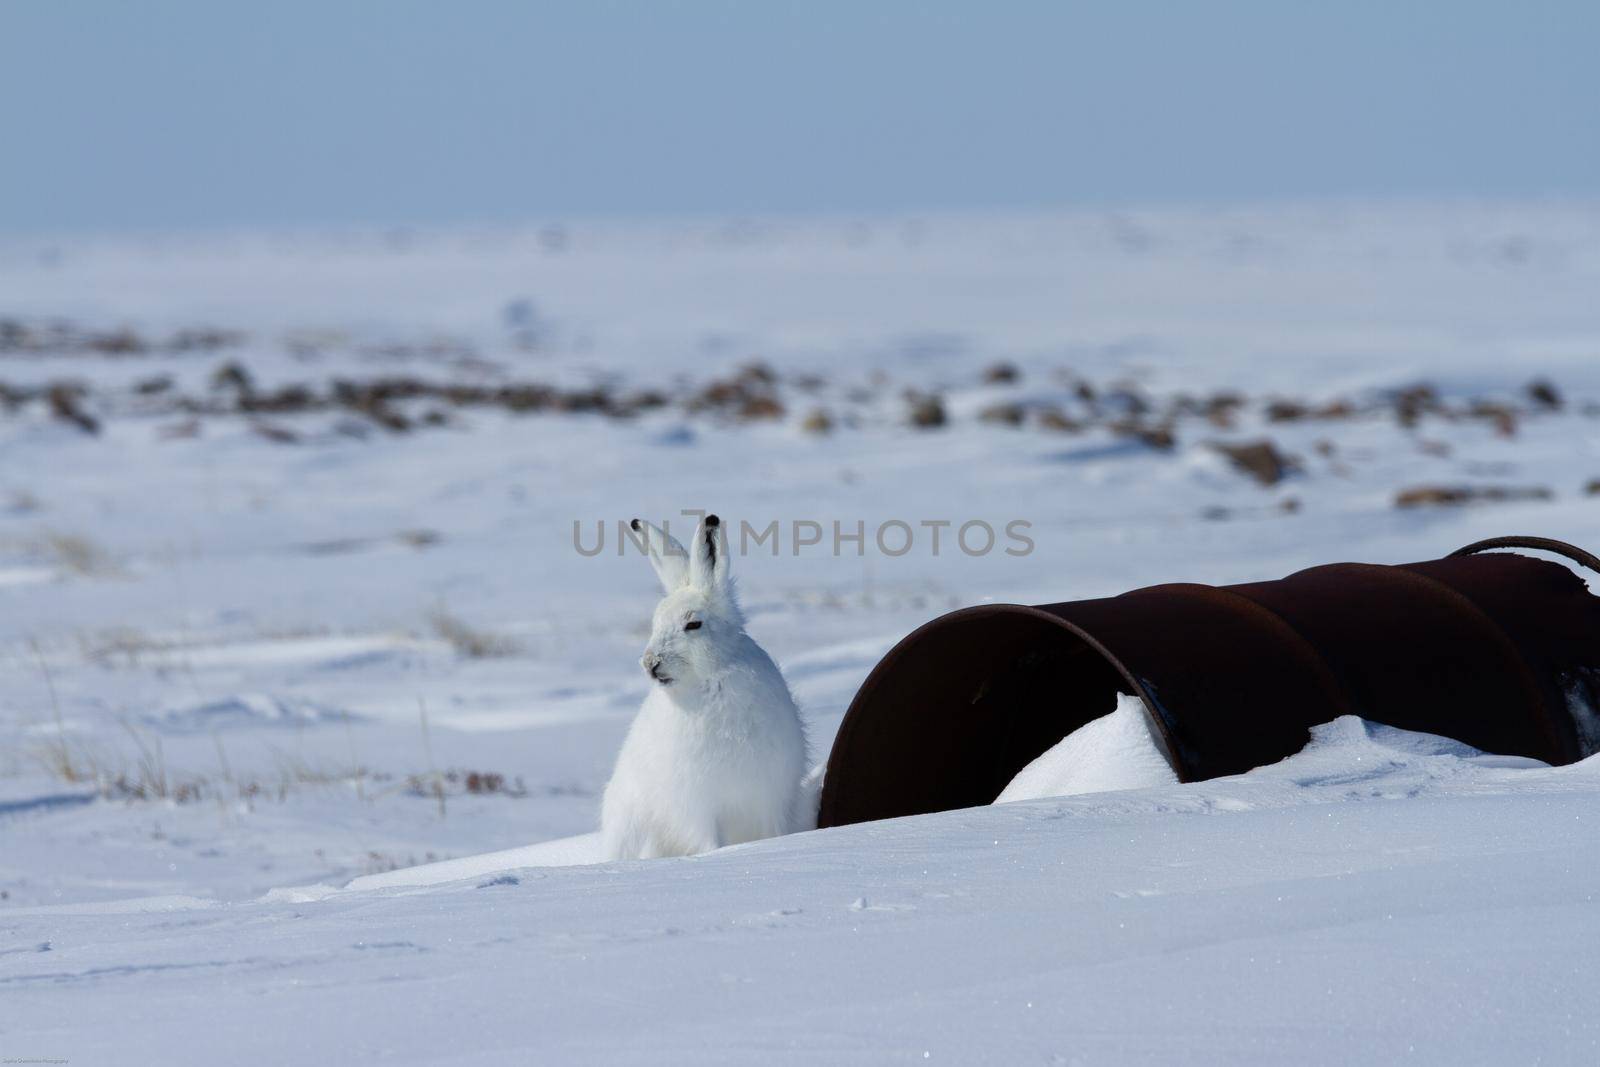 Arctic hare, Lepus arcticus, sitting on snow near an old fuel barrel by Granchinho